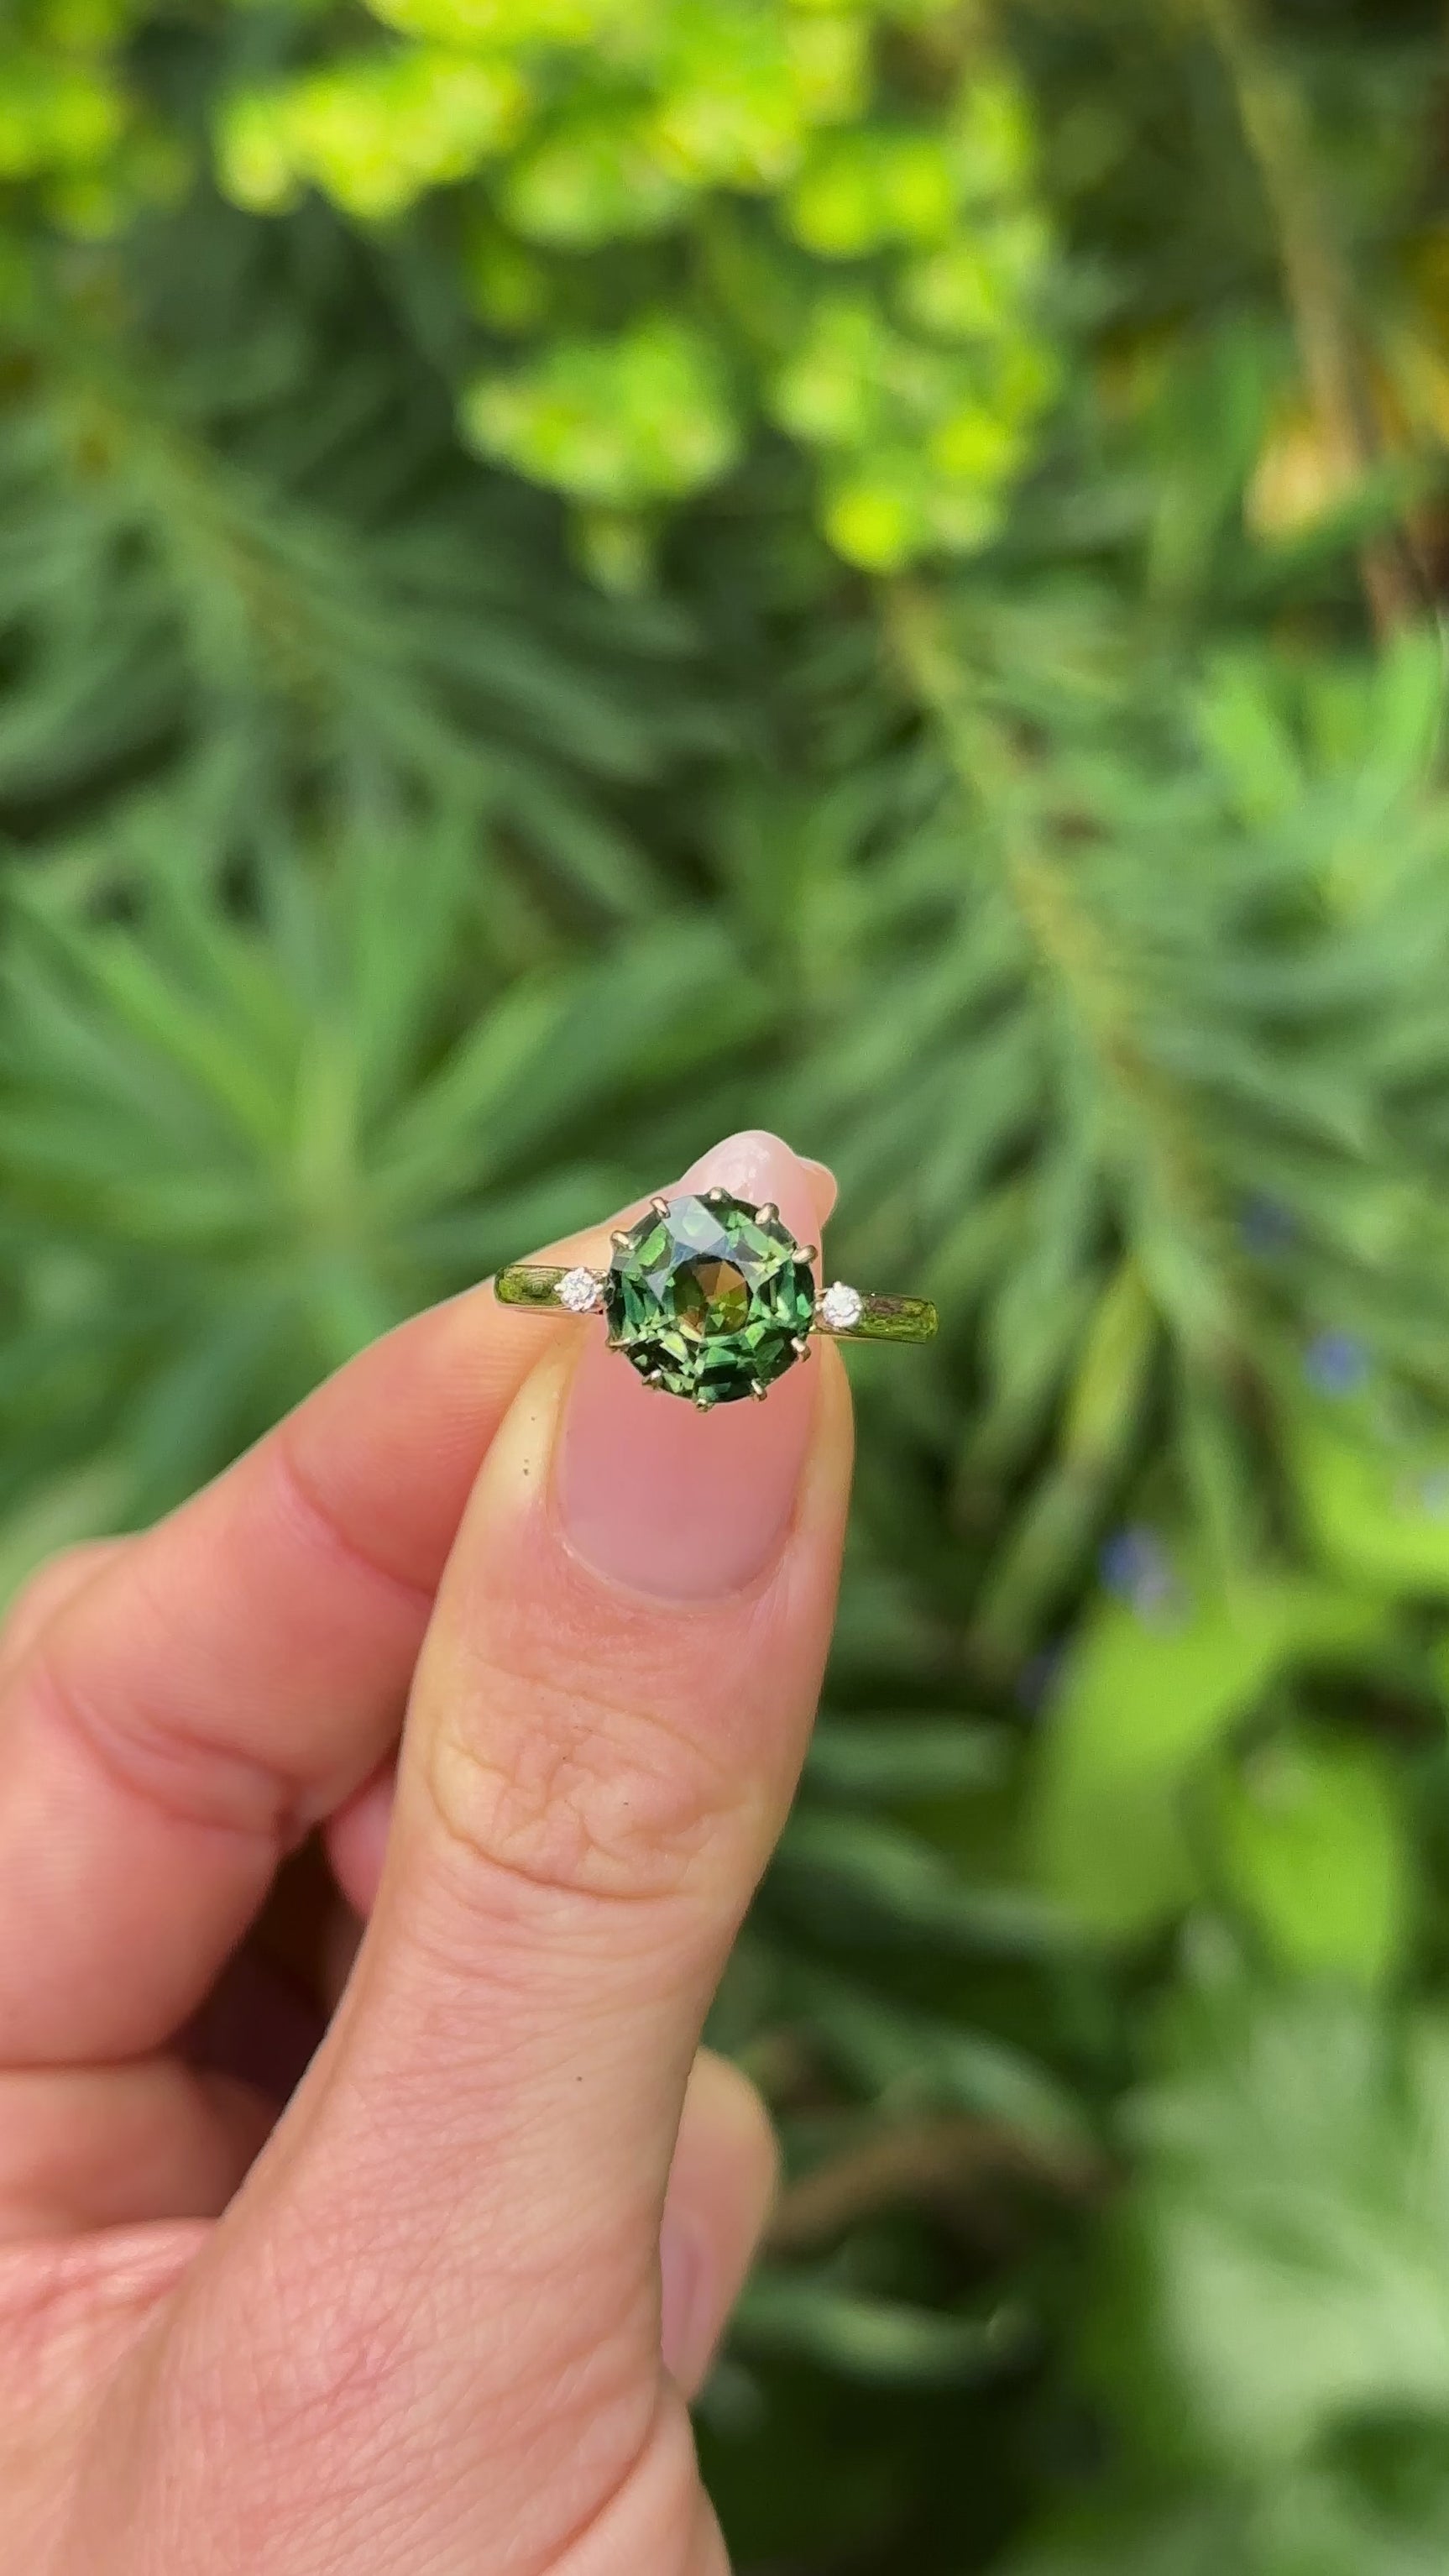 Antique, Edwardian Green Sapphire and Diamond Three-Stone Ring, 18ct Yellow Gold held in fingers.